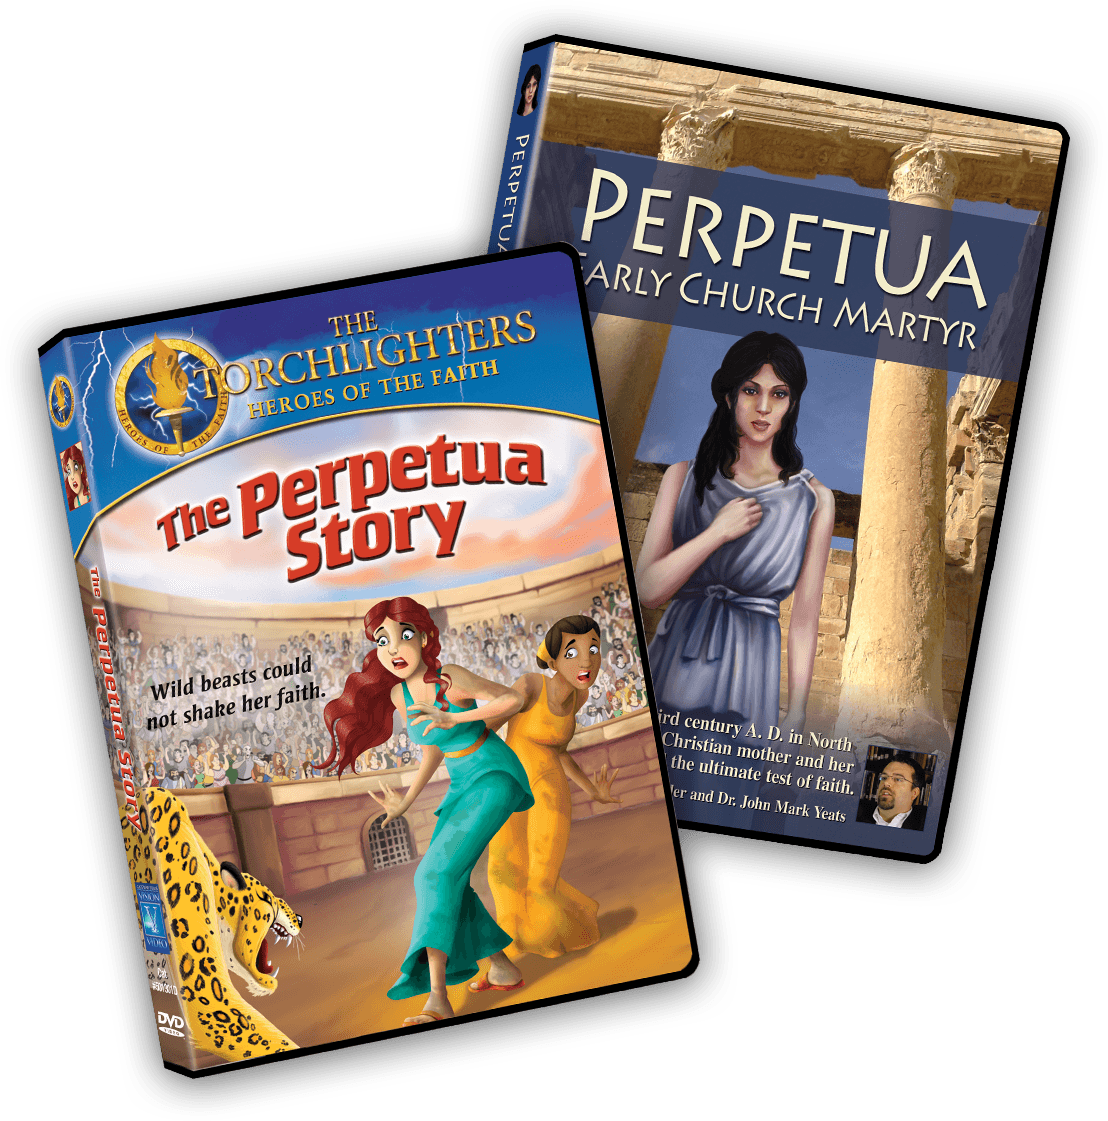 Two DVDs: The Perpetua Story and Perpetua: Early Church Martyr